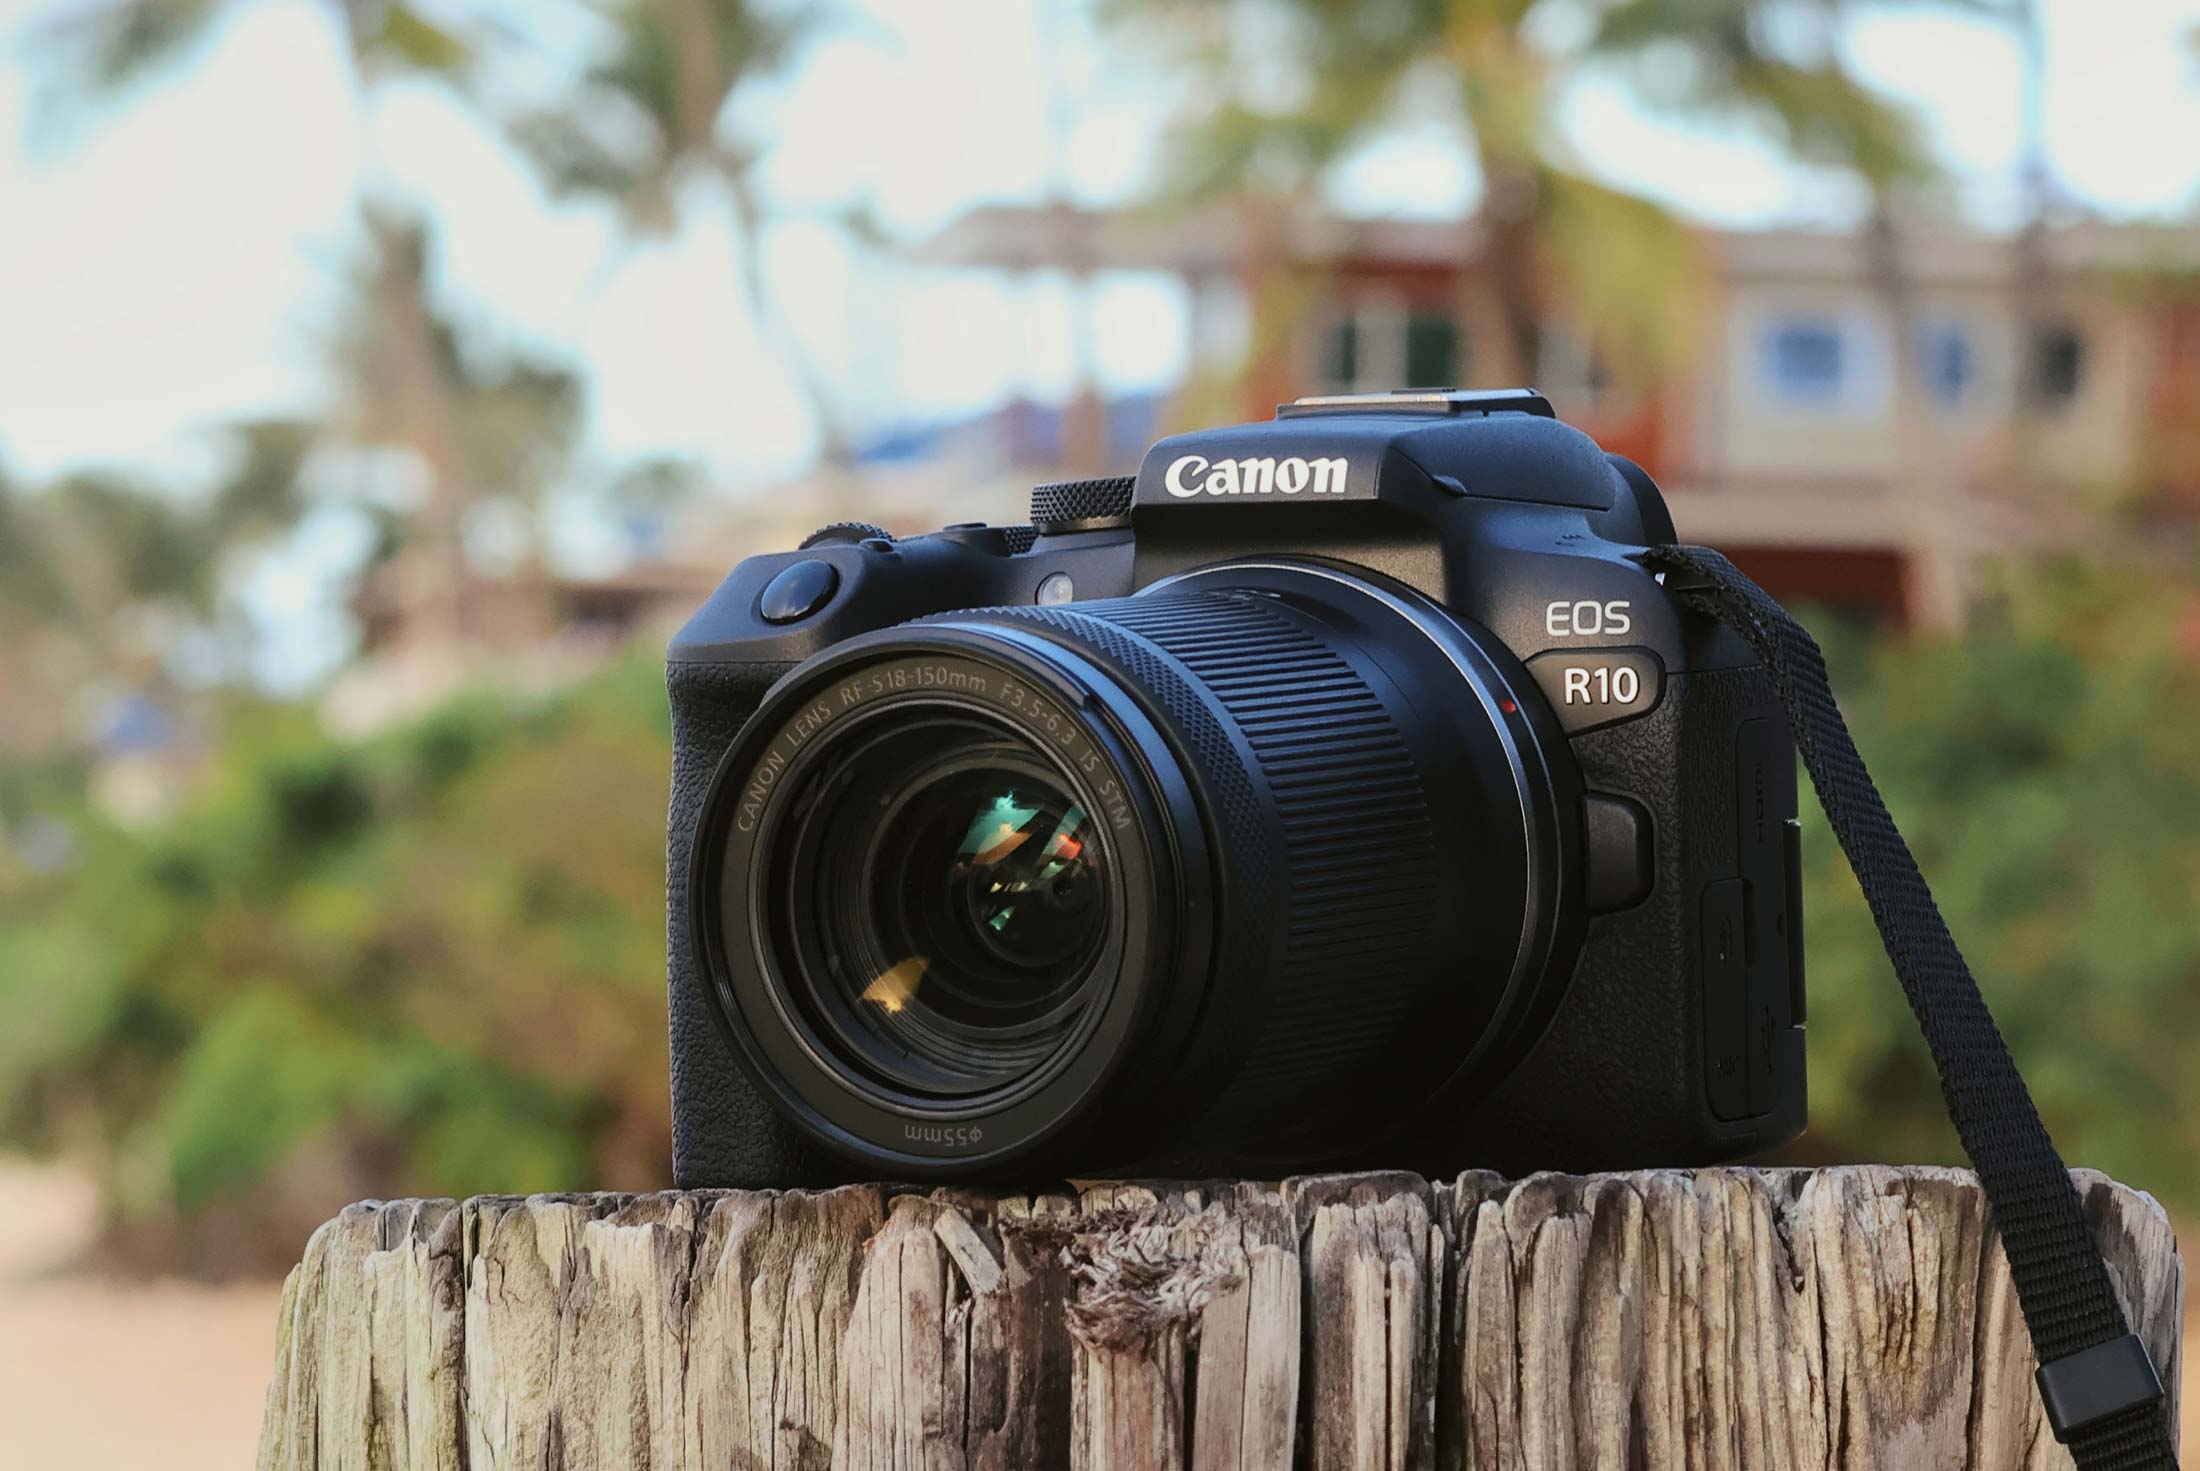 Is the Canon R10 worth it for video? - Buying Advice 